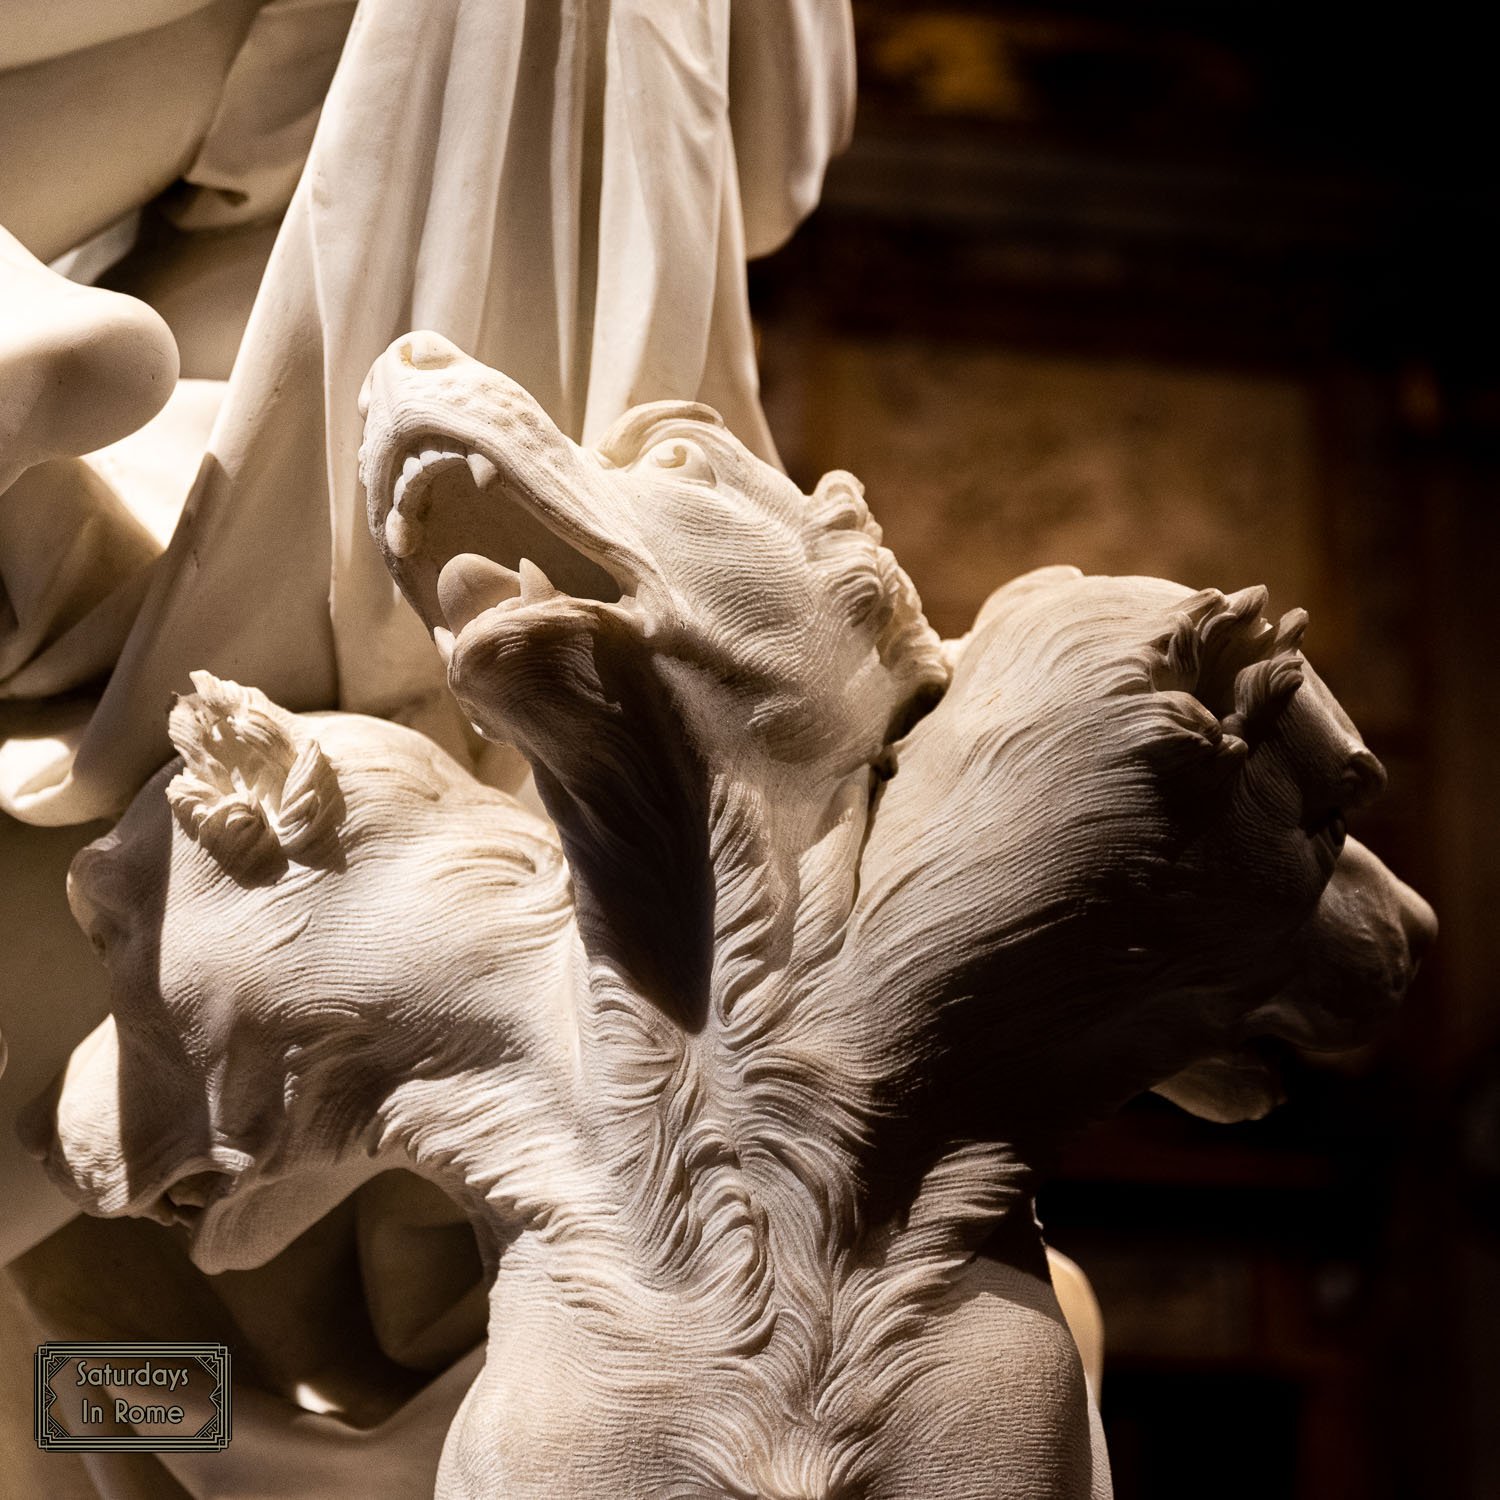 beautiful places in rome italy - Borghese Gallery